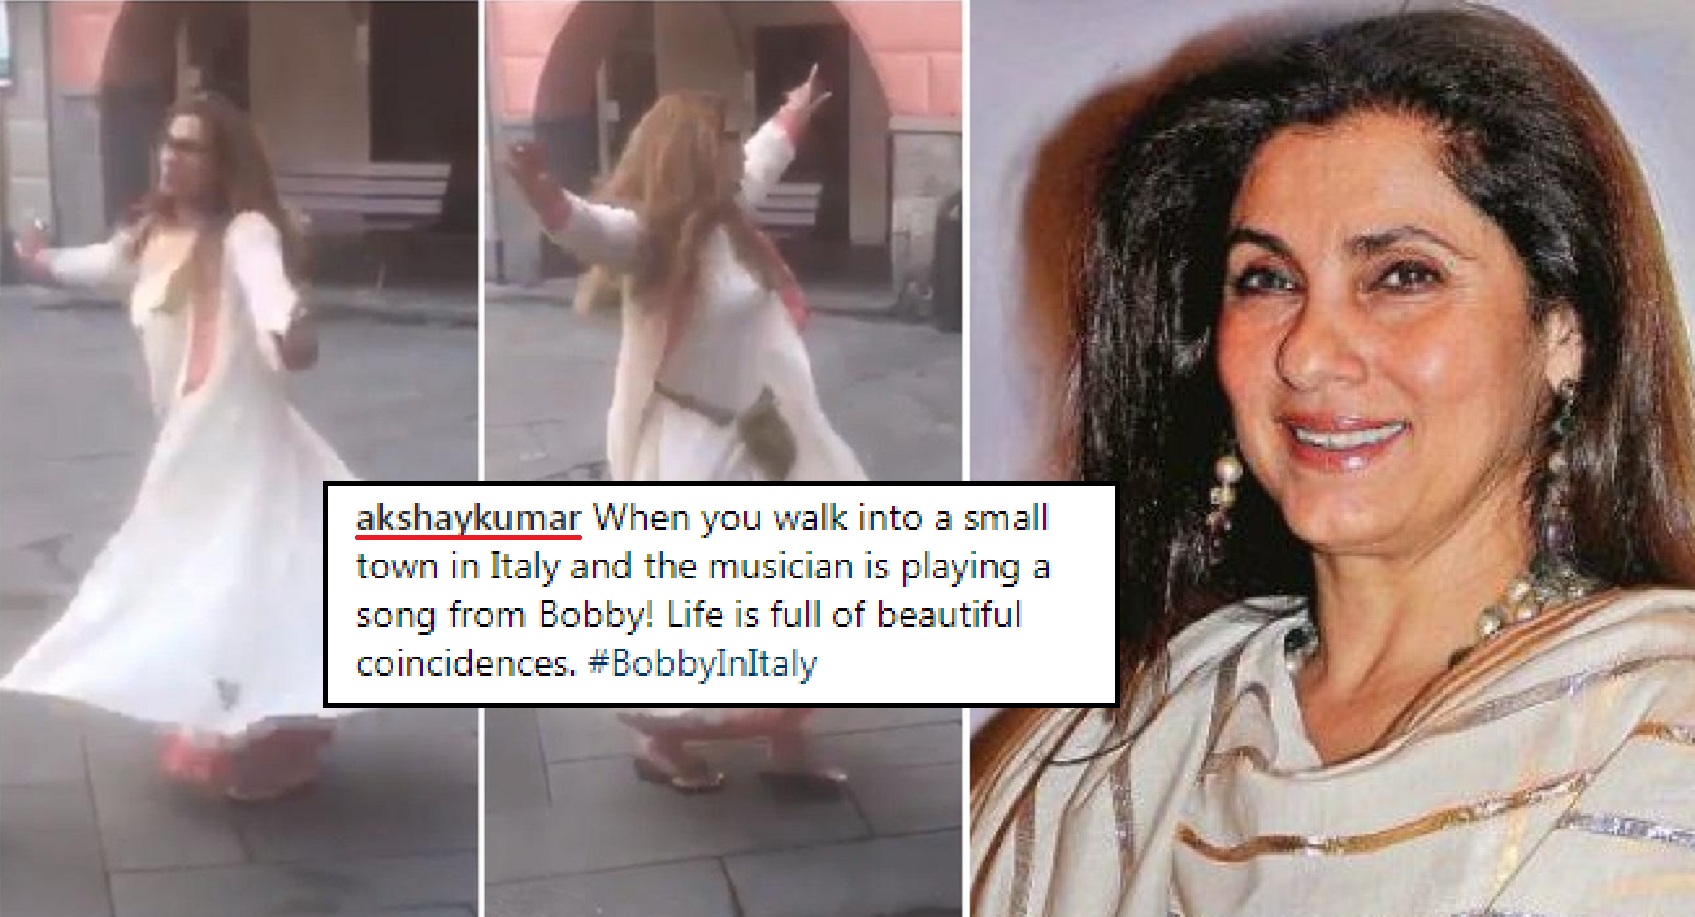 Dimple Kapadia Dances On the Streets Of Italy, As a Musician Plays Song from Bobby!